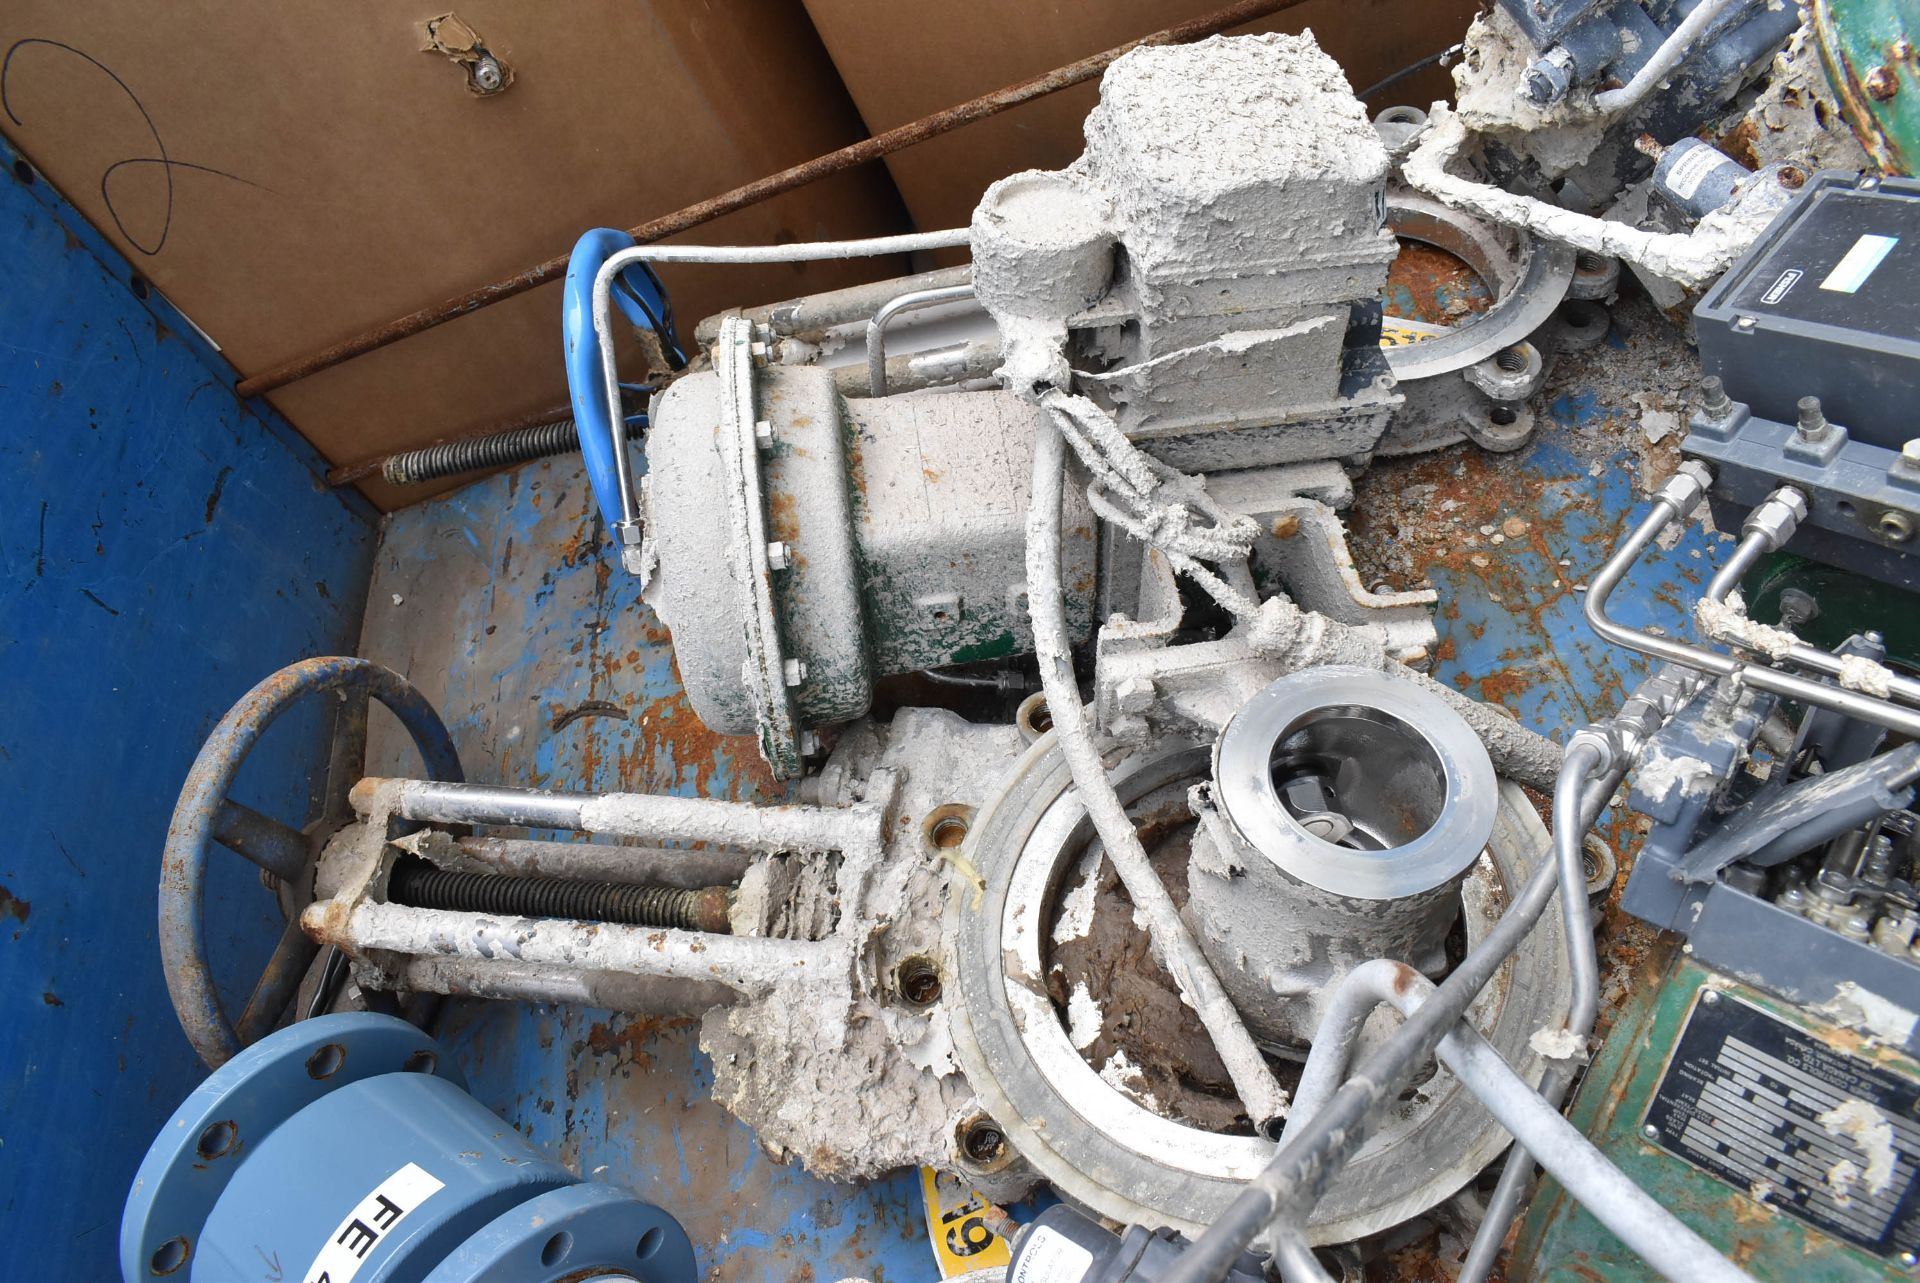 LOT/ CART WITH CONTENTS - FISHER VALVES WITH ACTUATORS, MAGNETIC FLOWMETERS, KNIFE VALVES [RIGGING - Image 5 of 5